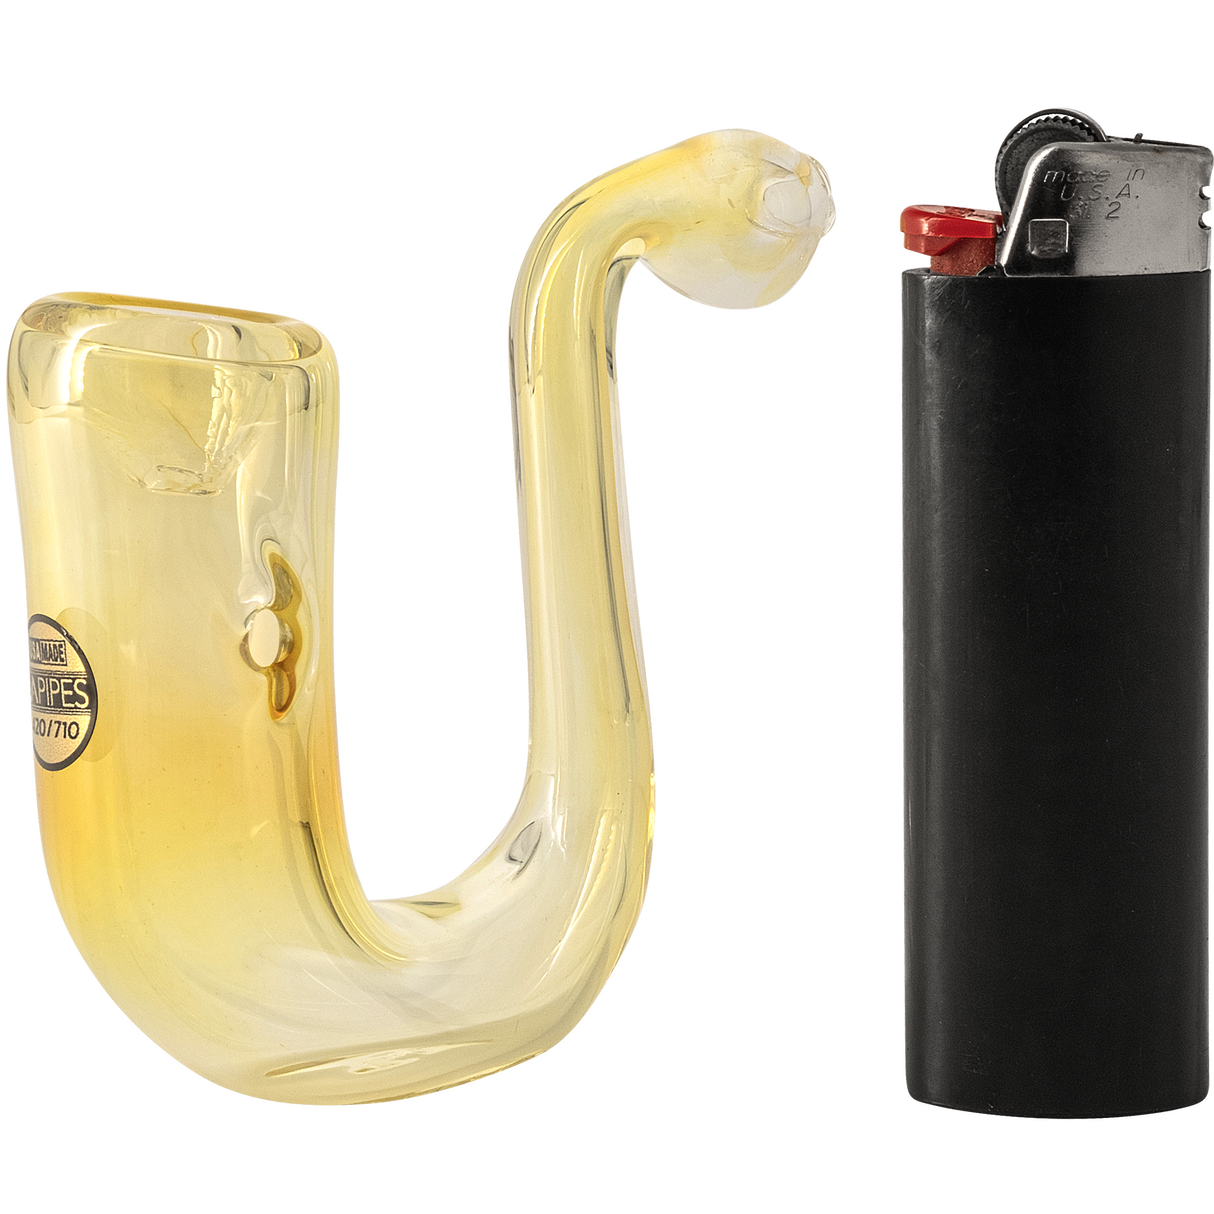 LA Pipes "Calabash" Fumed Glass Sherlock Hand Pipe - Side View with Lighter